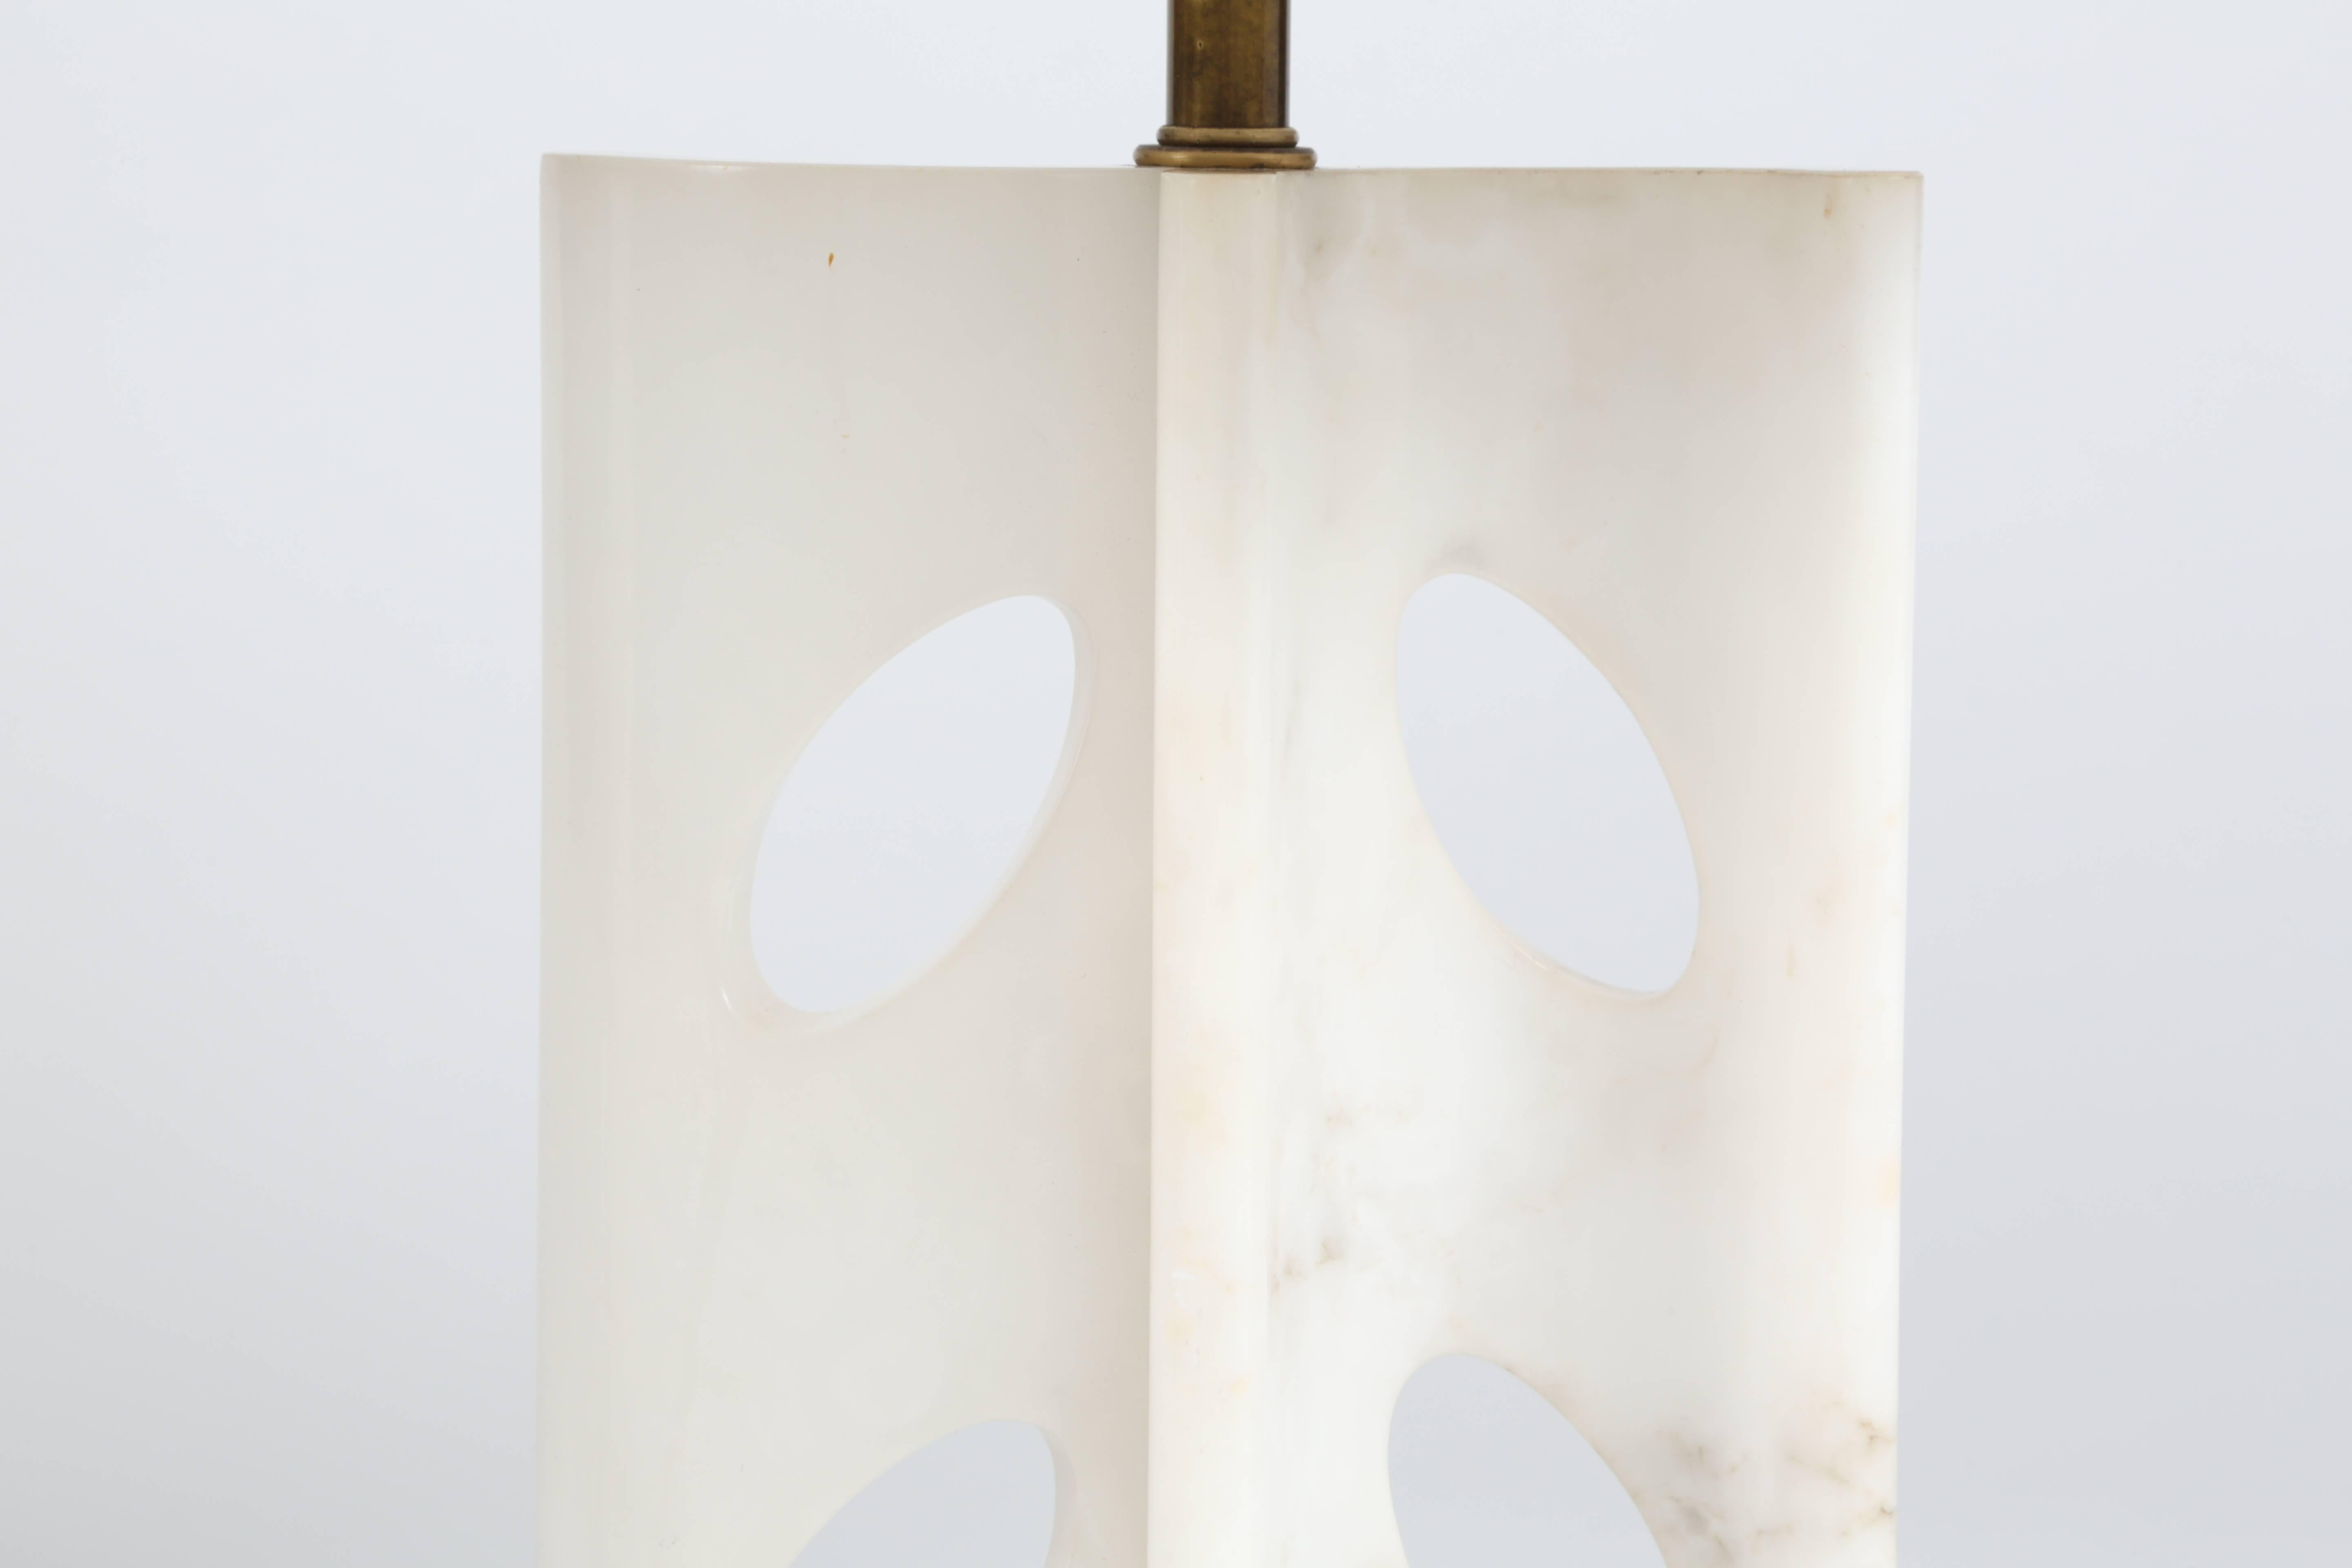 Elegant pair of table lamps by Marbro Lamp Co. featuring a undulating carved Alabaster wings with a leaf cut-out. Custom-made shades made to complement the lamps feature silk drum shades finished in a nubby casement fabric for a period feel. Lamps